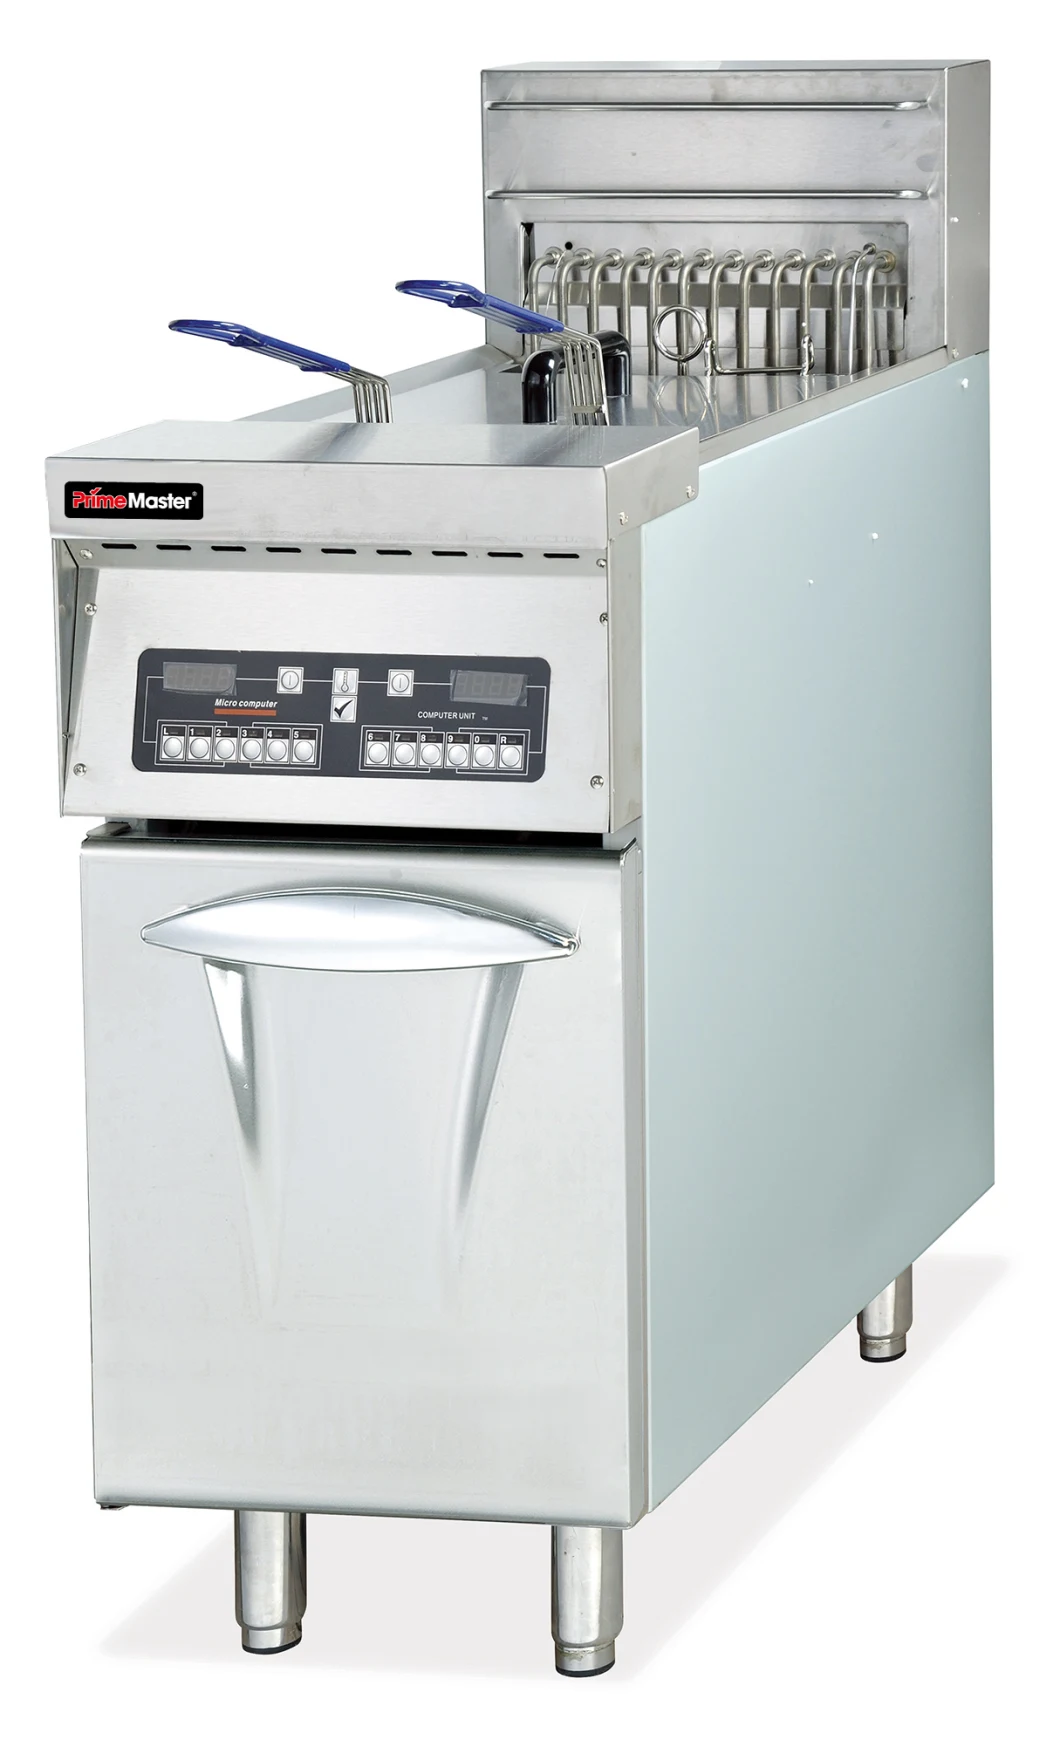 Free Standing Commercial Kitchen Equipment Electric Fryer with Cabinet Fryer for Meat and Food French Fire Computer Digital Control 1tank 2 Basket